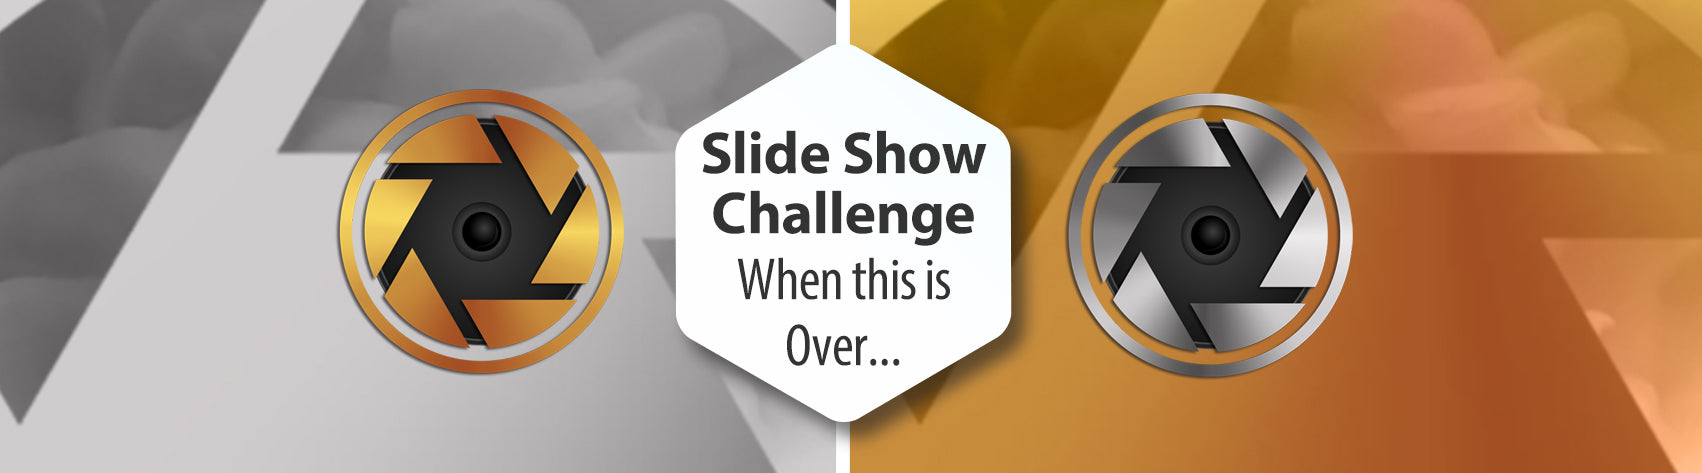 Slide Show Challenge - When This is Over